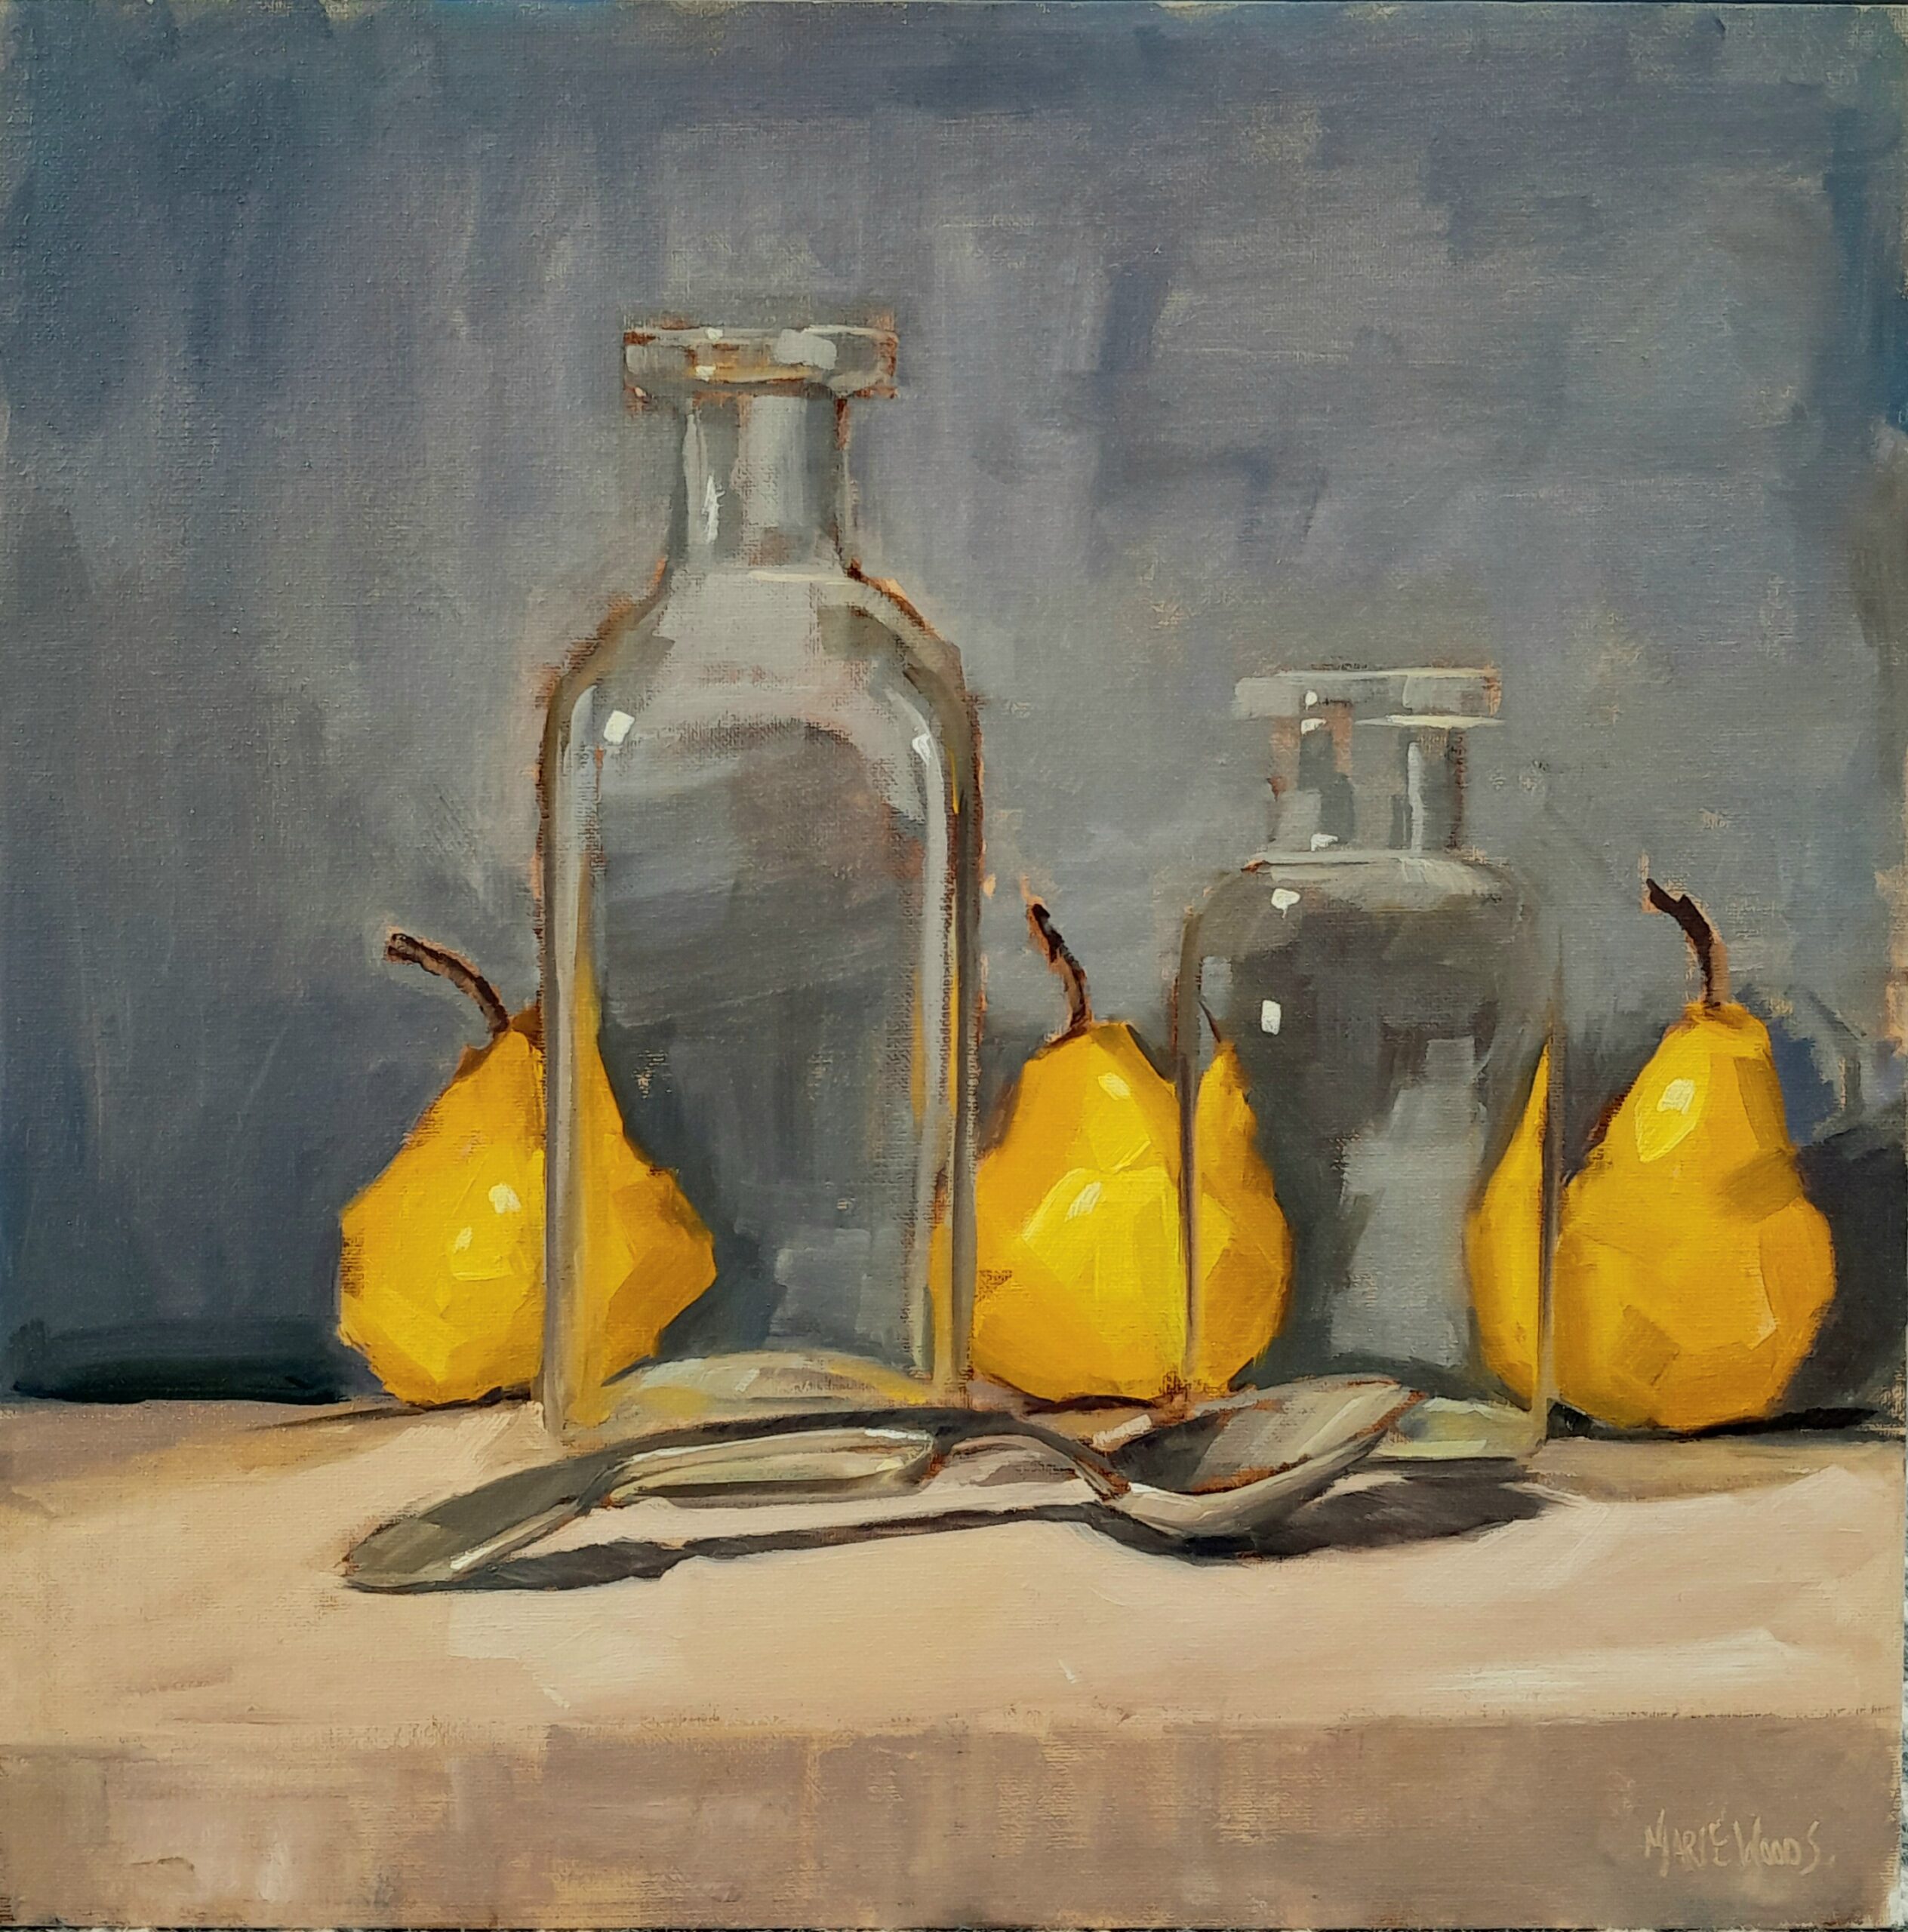 Original oil painting “pears and Bottles” by Irish artist Marie Woods .